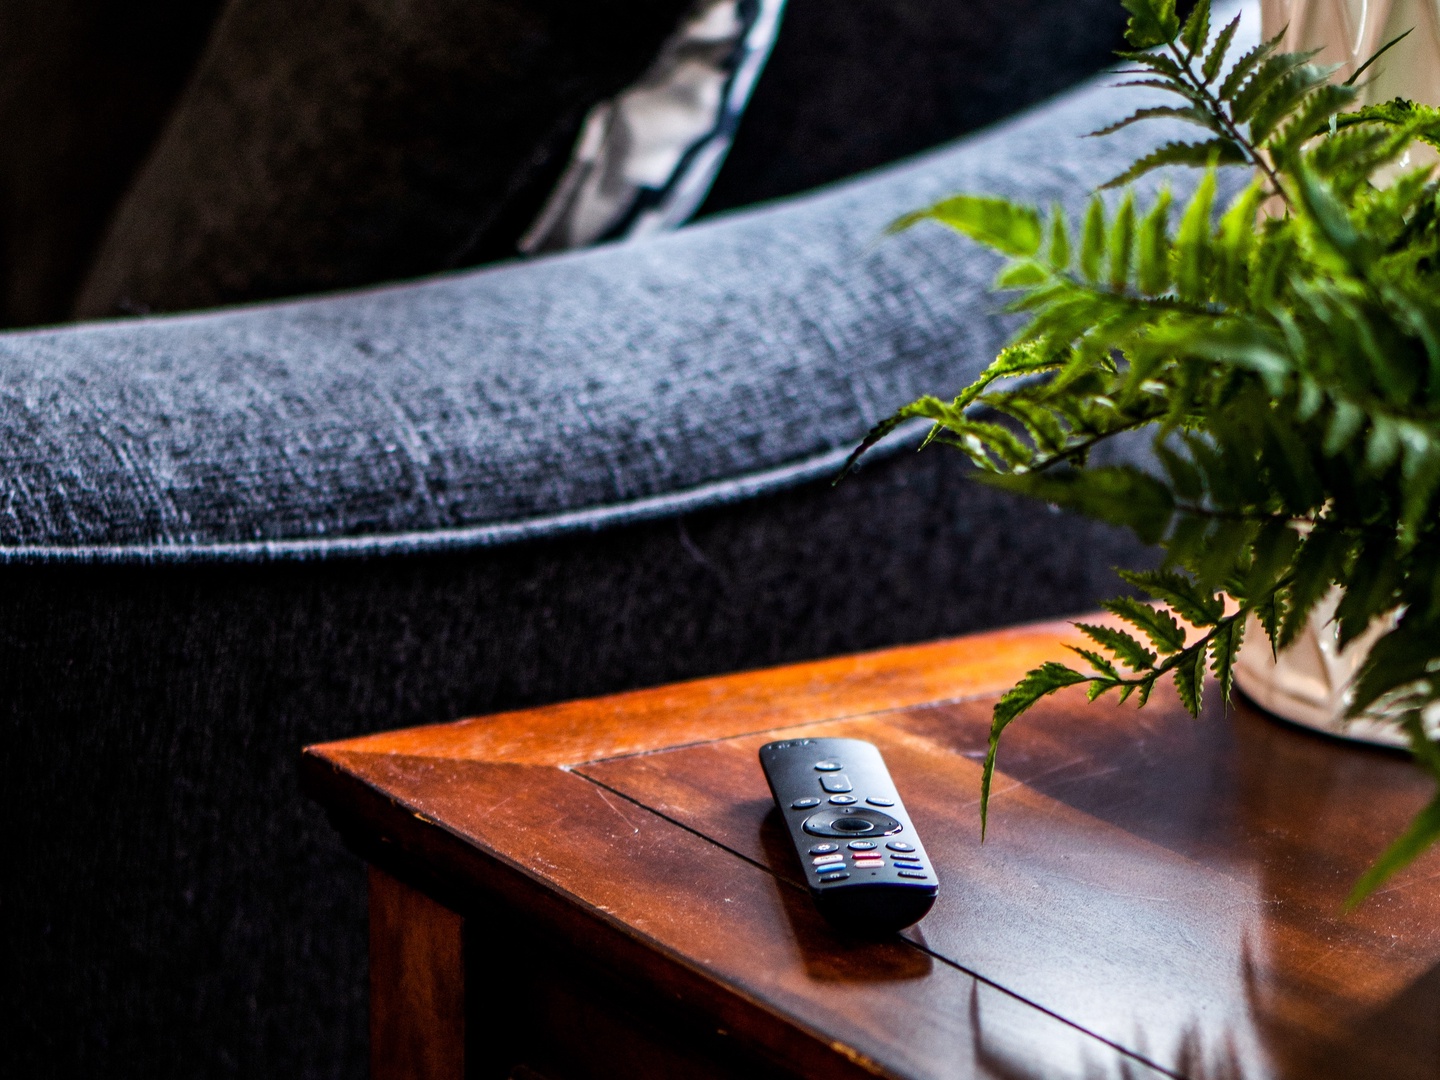 Curl up in the cozy living room & stream all your favorite entertainment